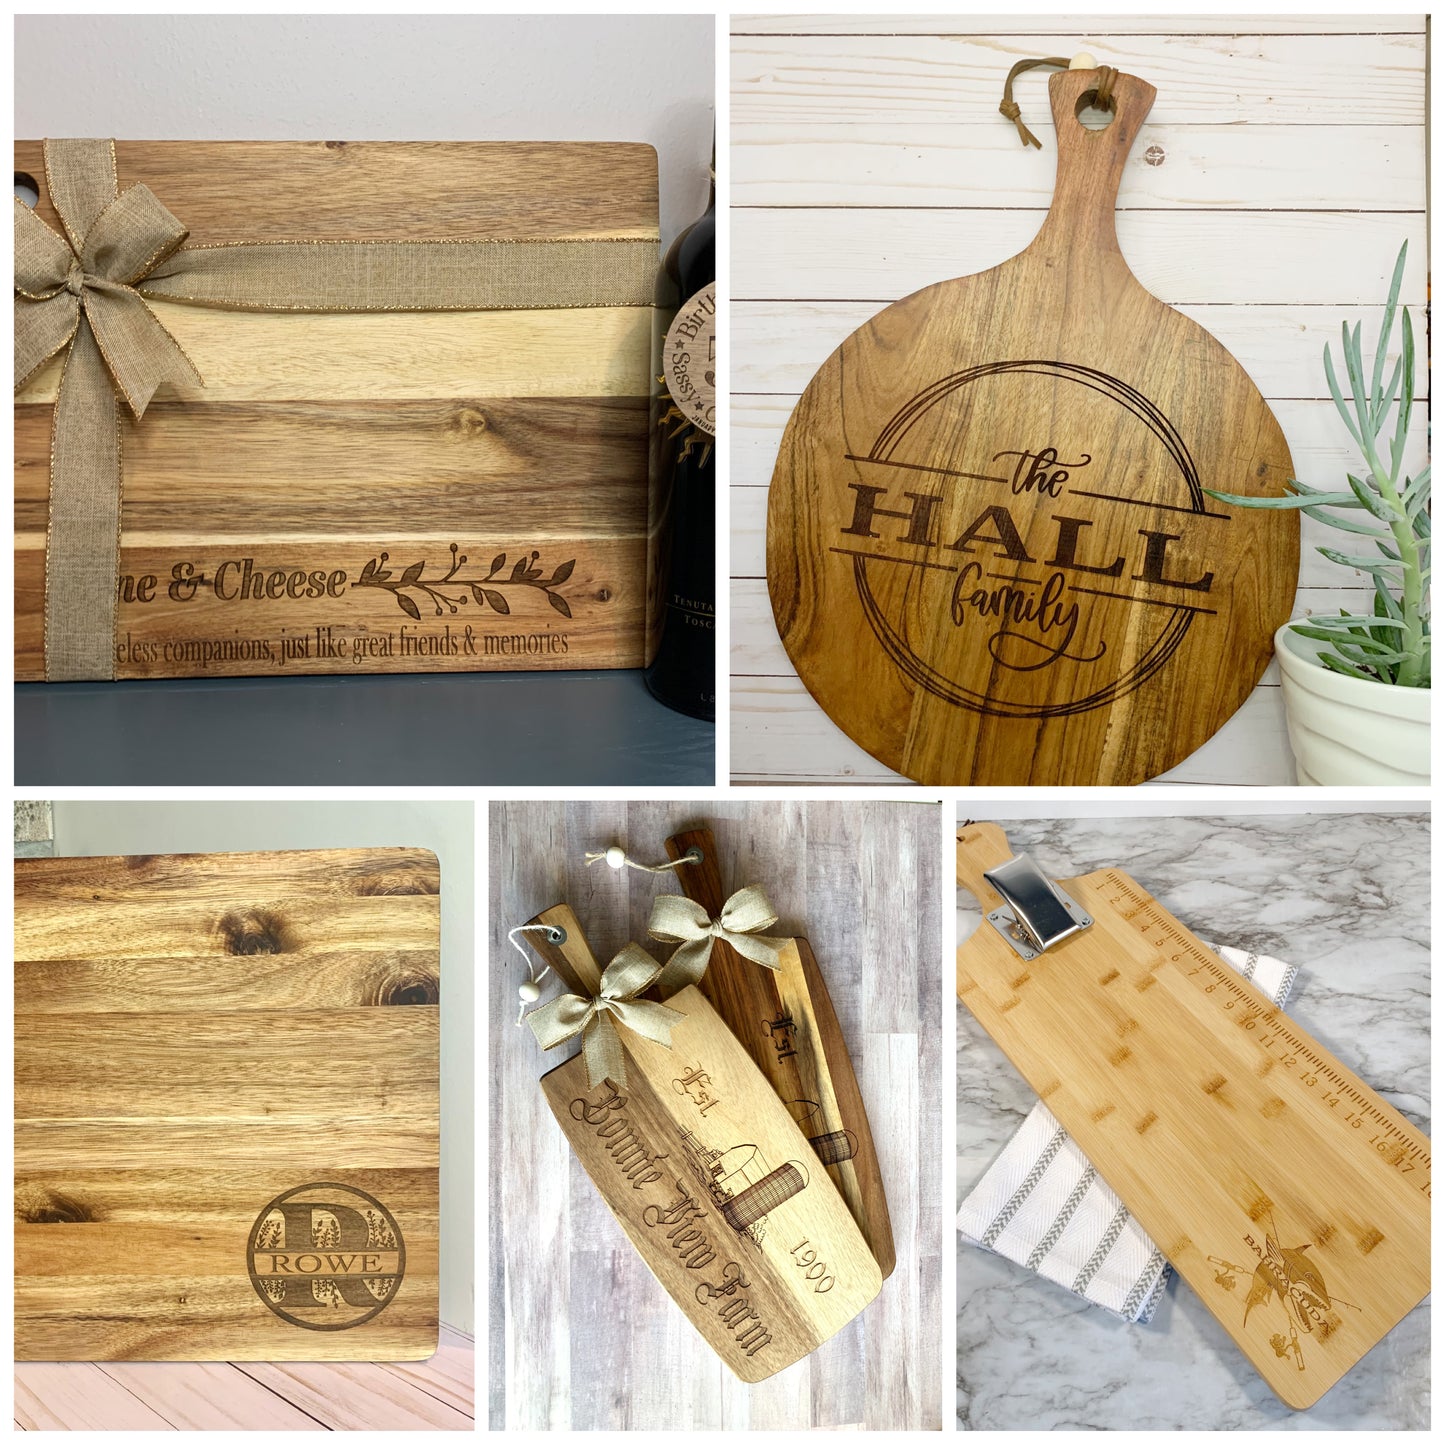  Personalized Wooden Cutting Board Handmade in USA